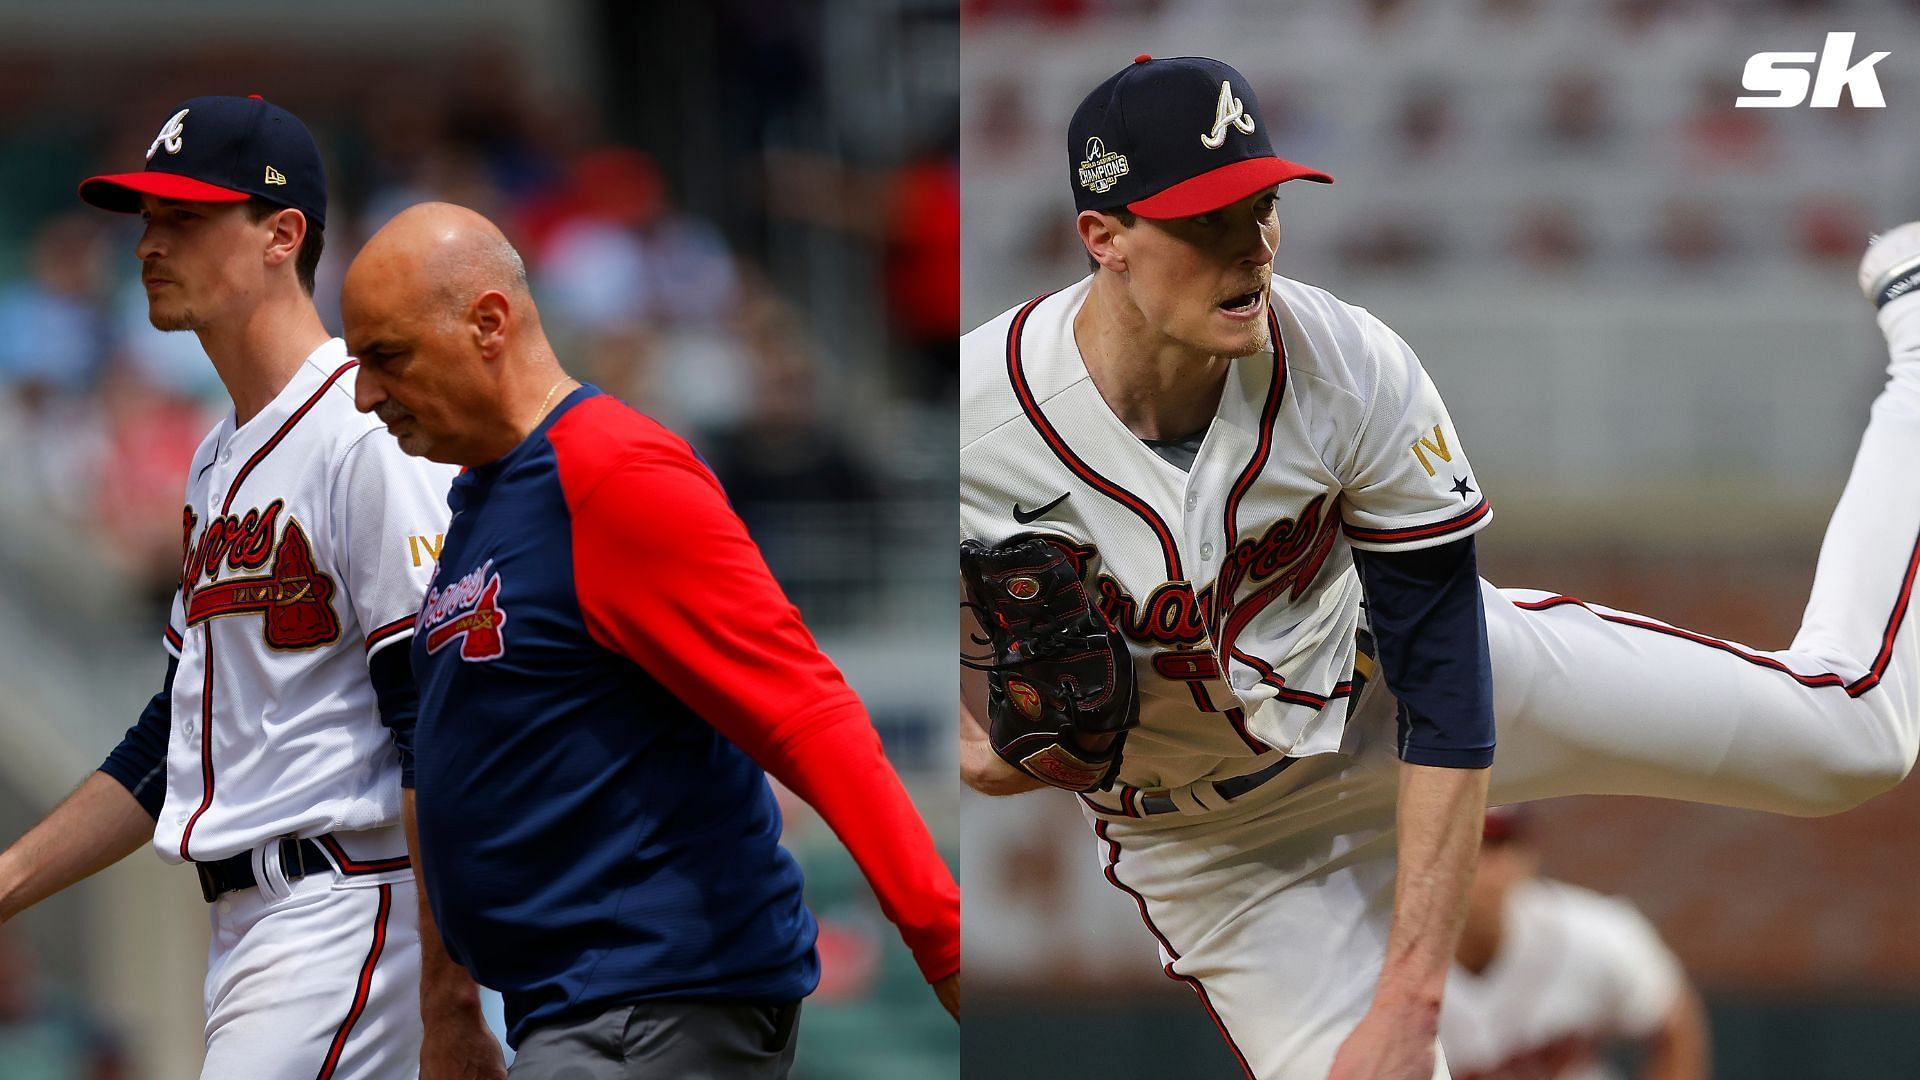 Braves' Max Fried strained hamstring, will be out 'for a while